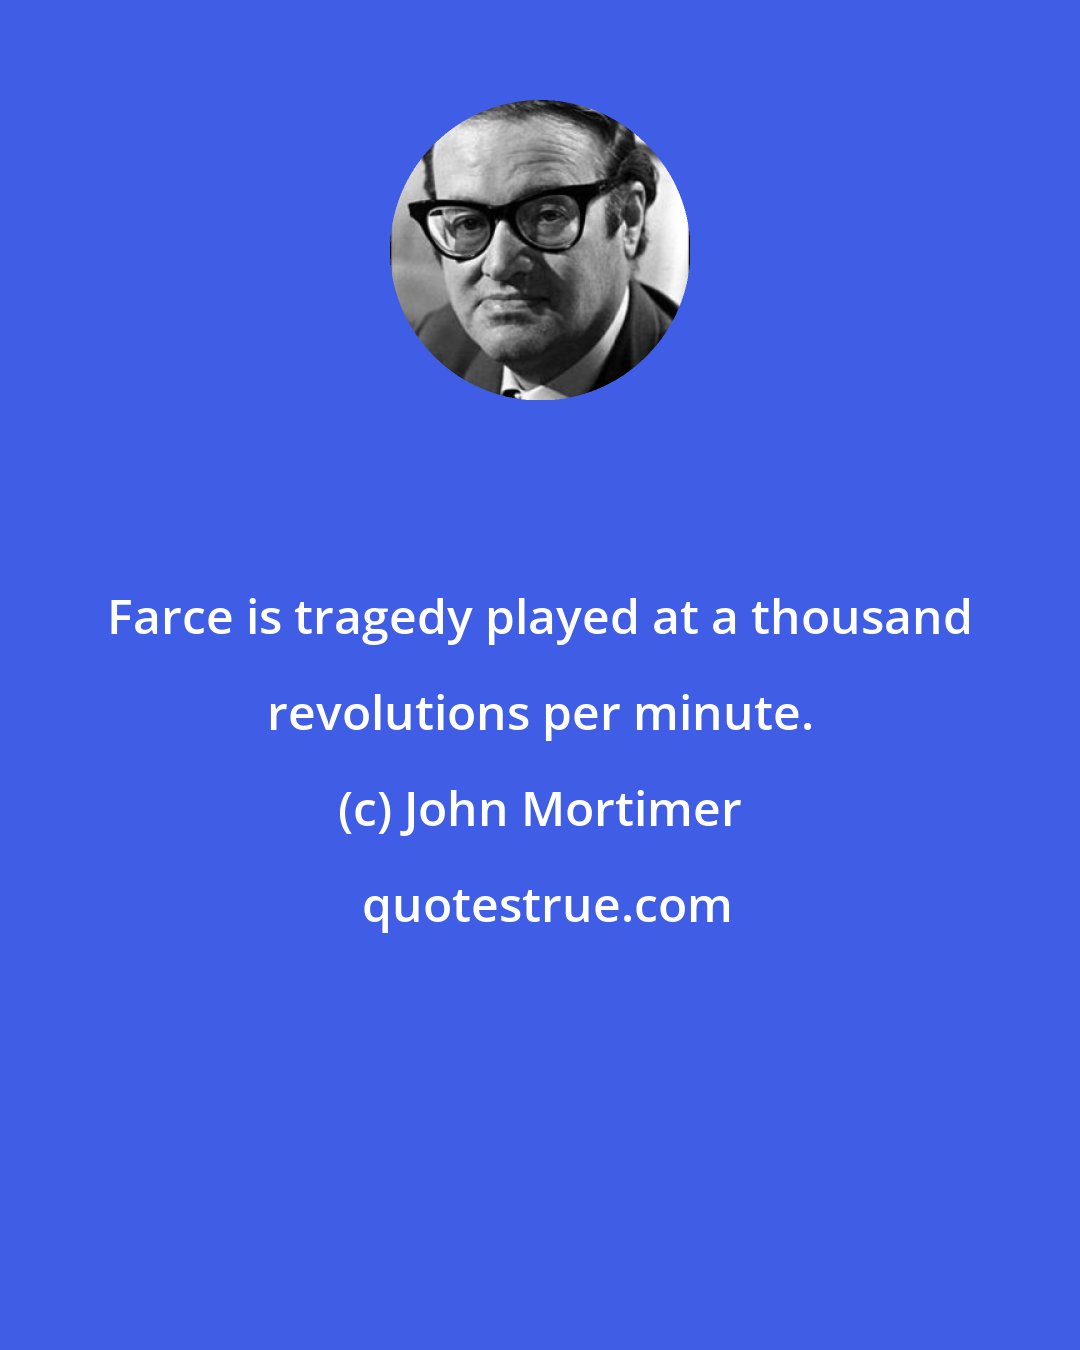 John Mortimer: Farce is tragedy played at a thousand revolutions per minute.